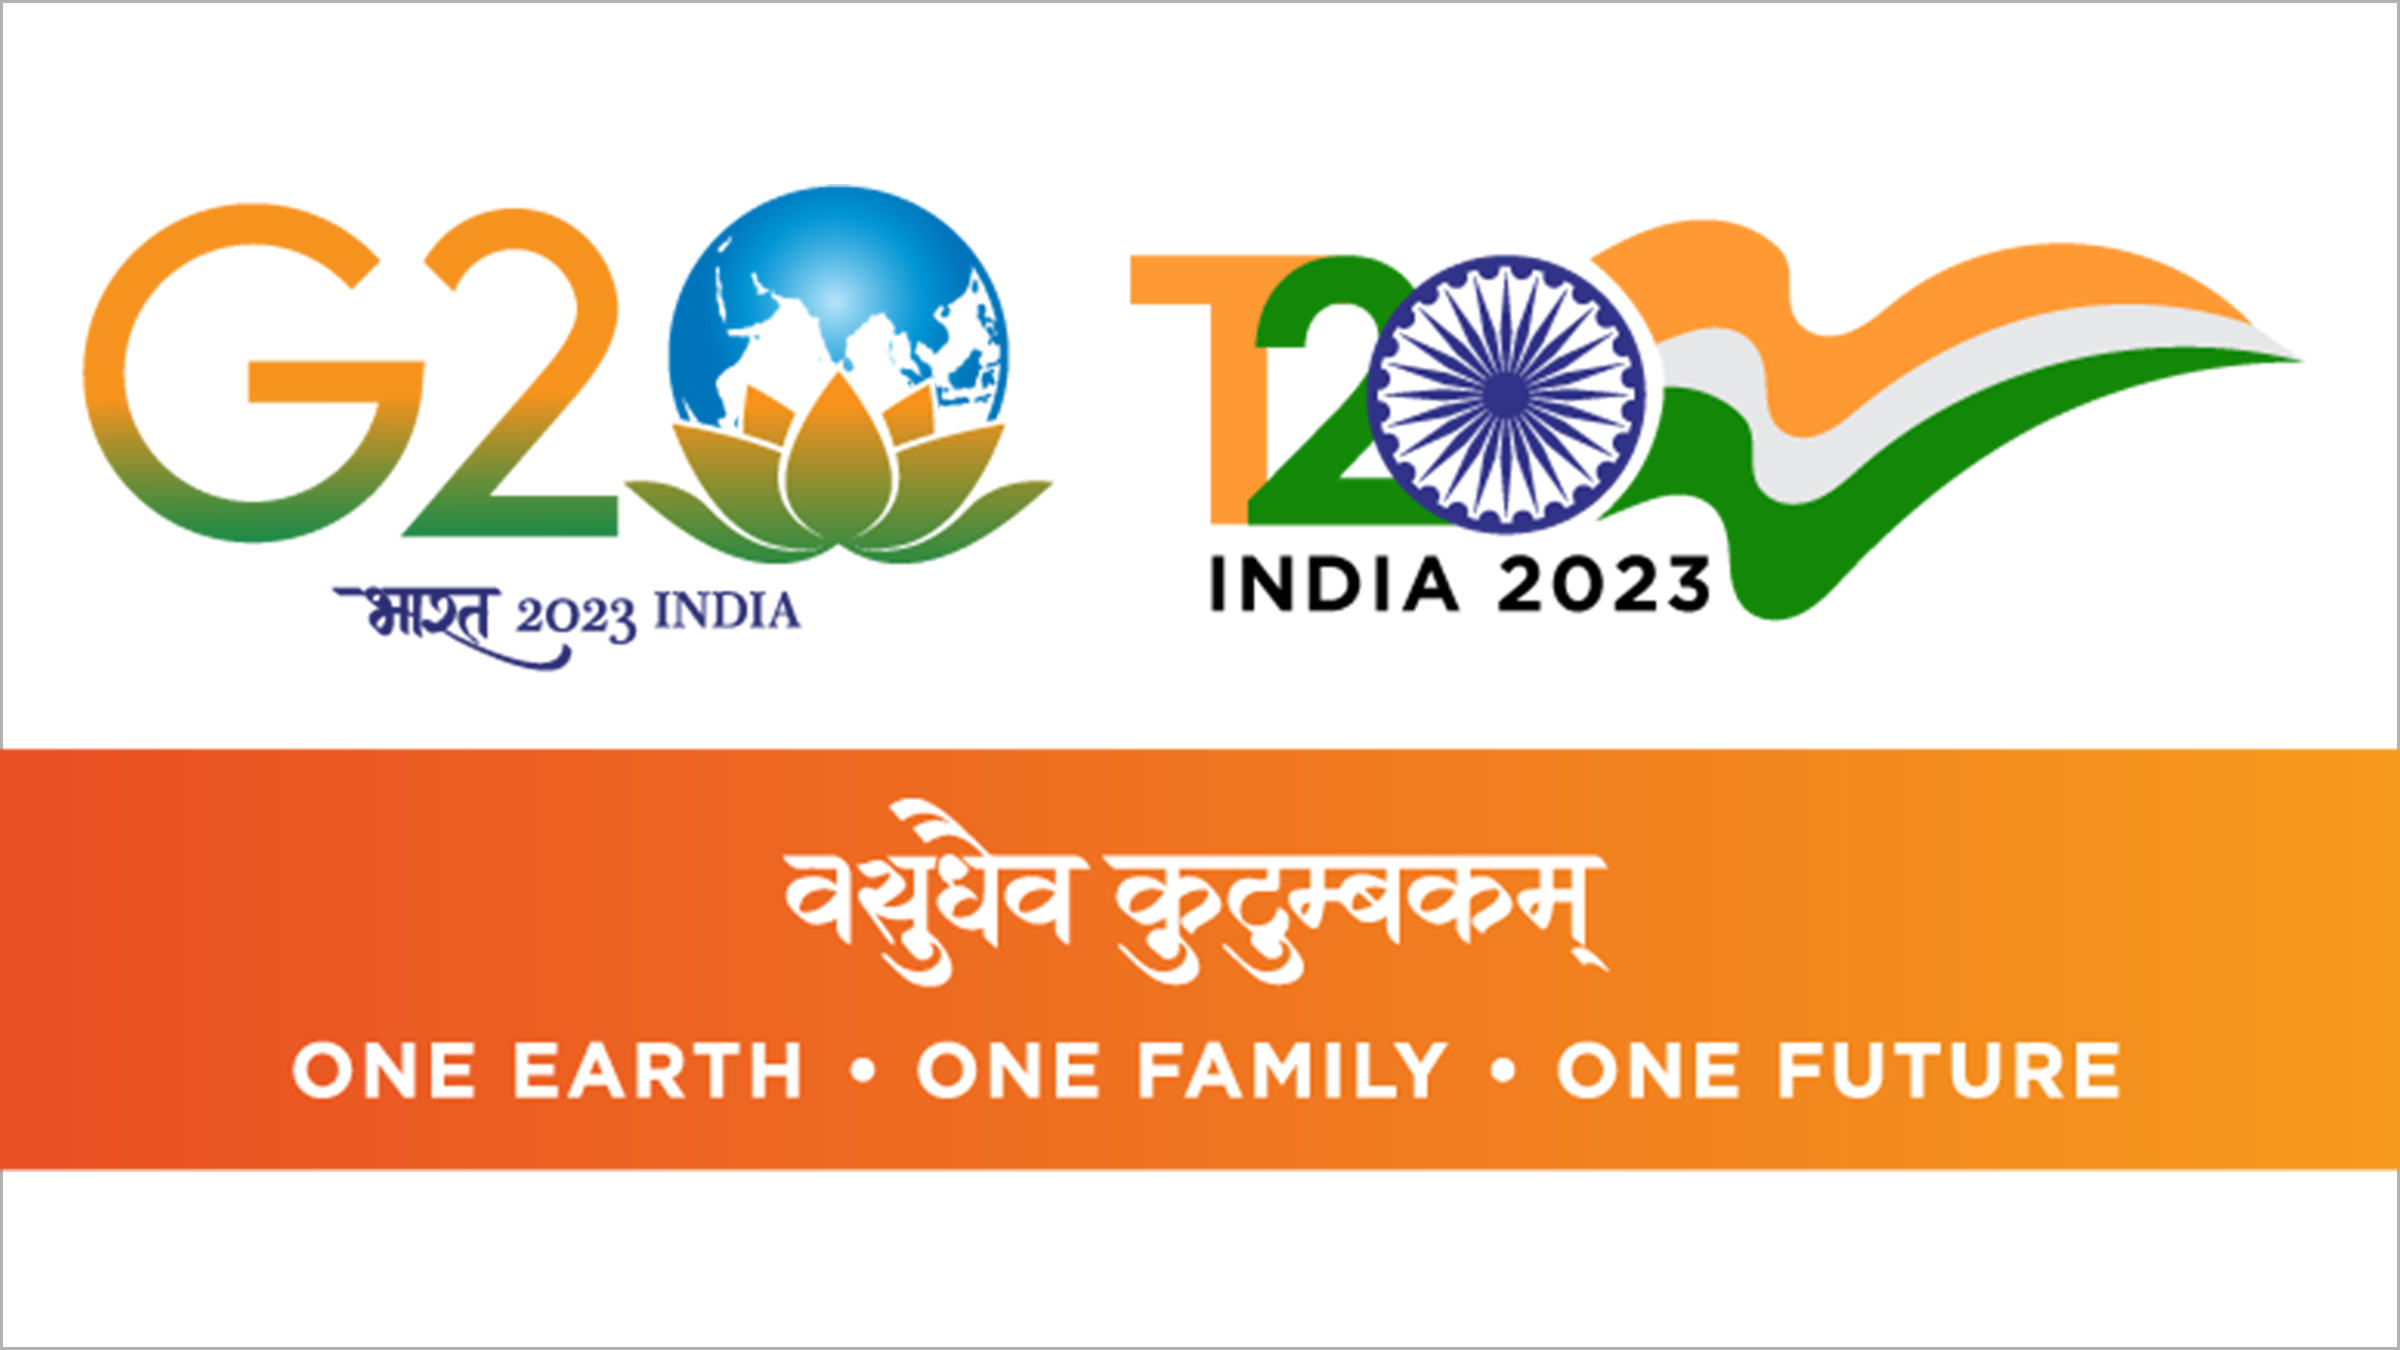 India’s Presidency of the G20: “LiFE, Resilience and Values” in a World of Geopolitics